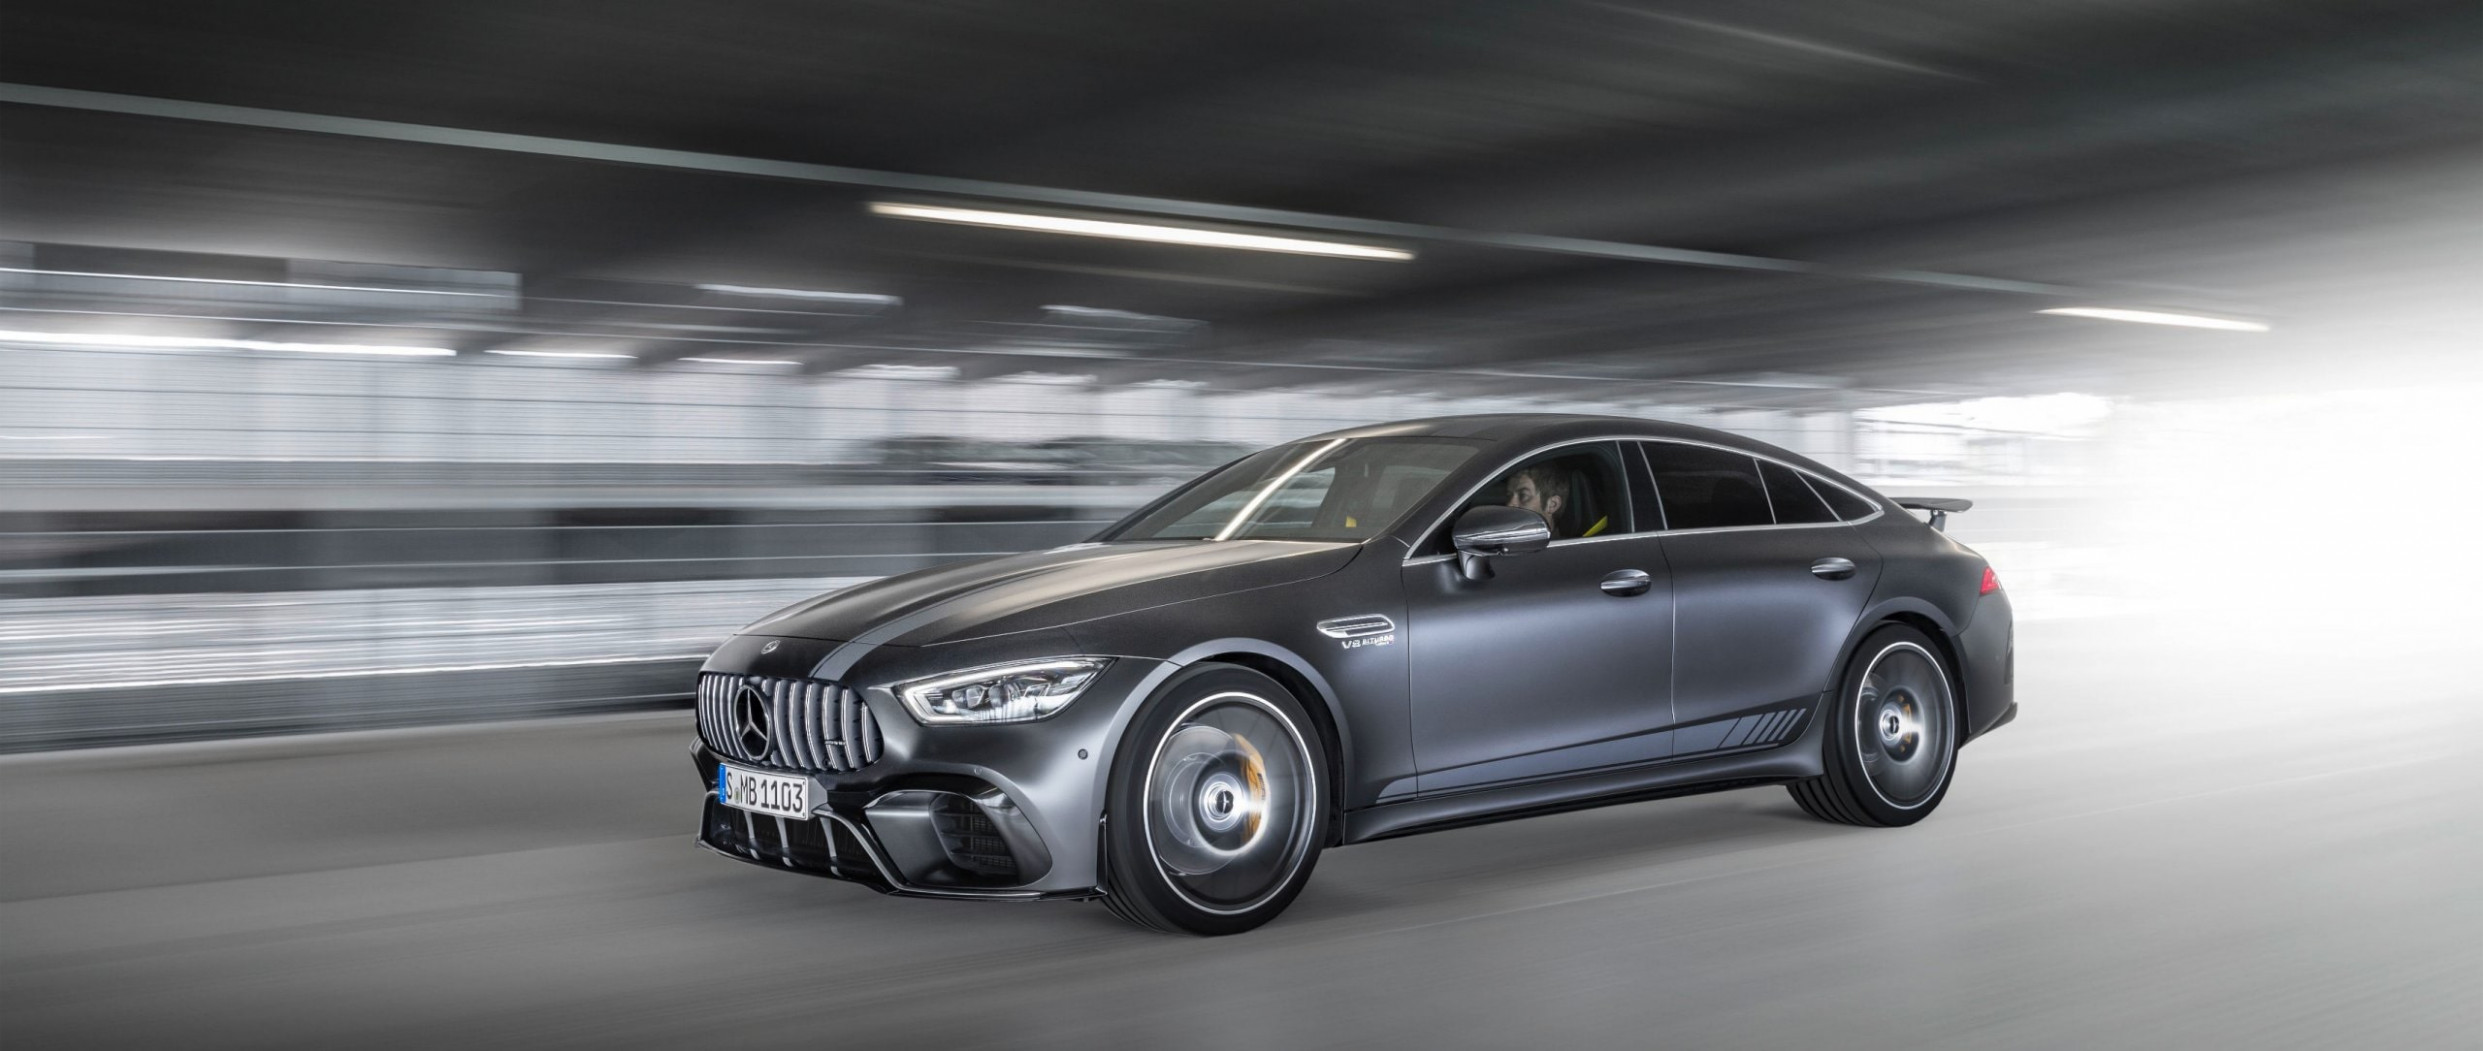 Redesign and Review mercedes benz gt 63